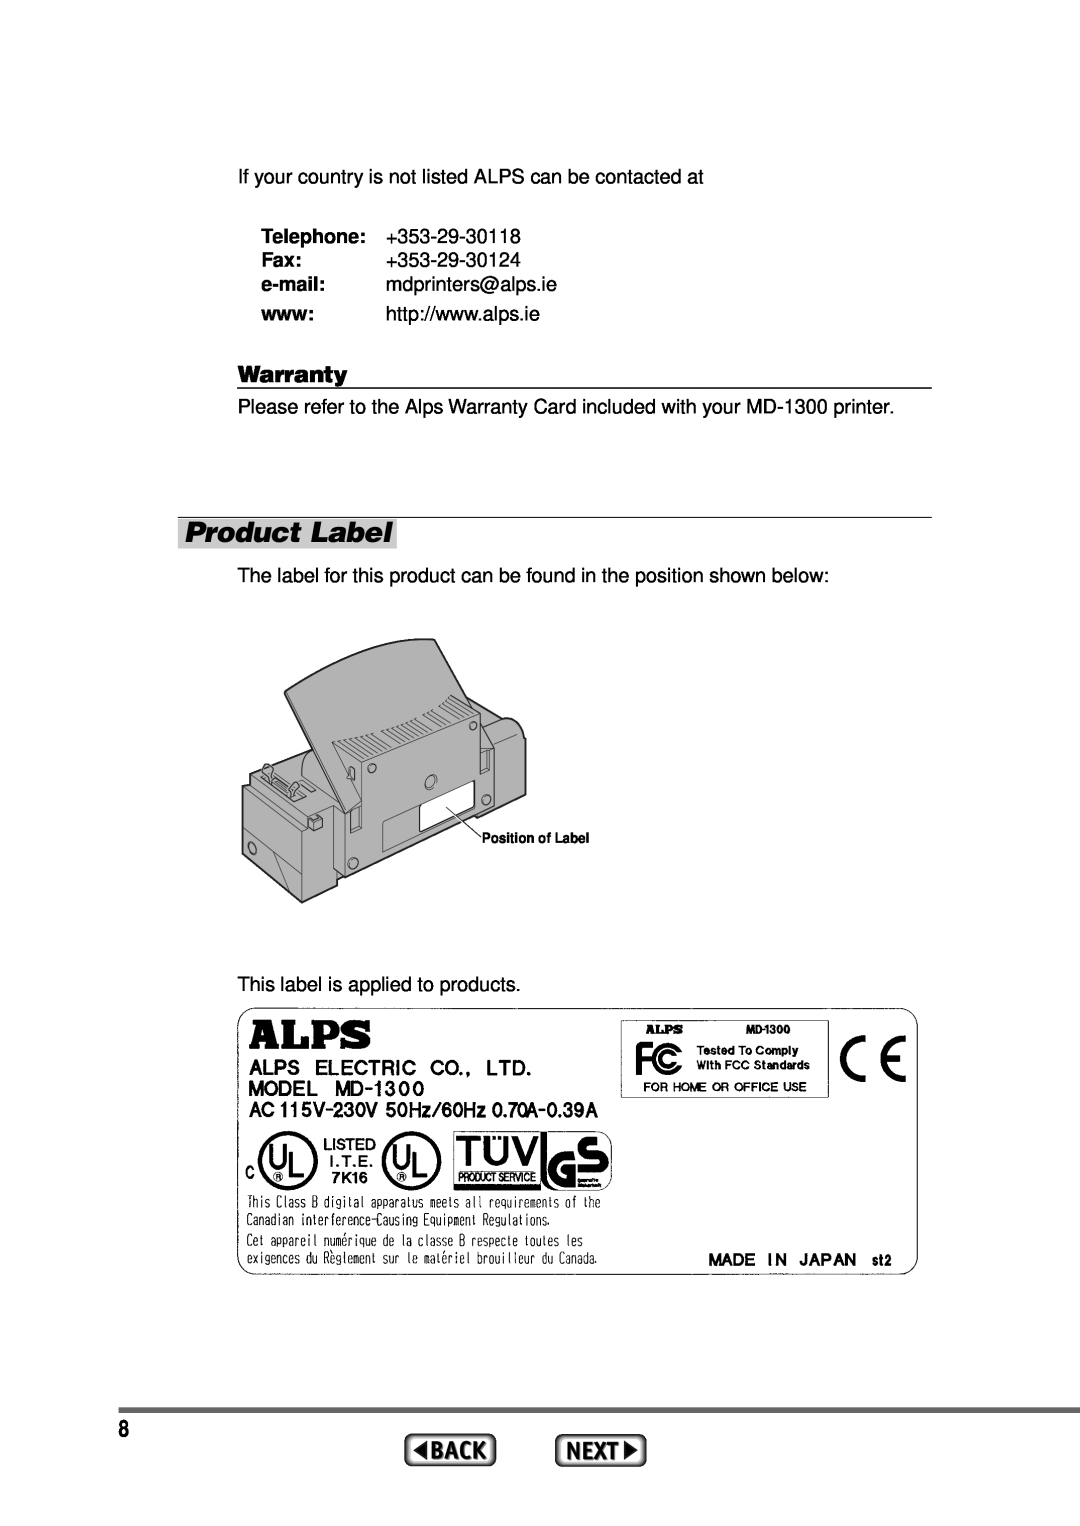 Alps Electric MD-1300 manual Product Label, Warranty, Position of Label 